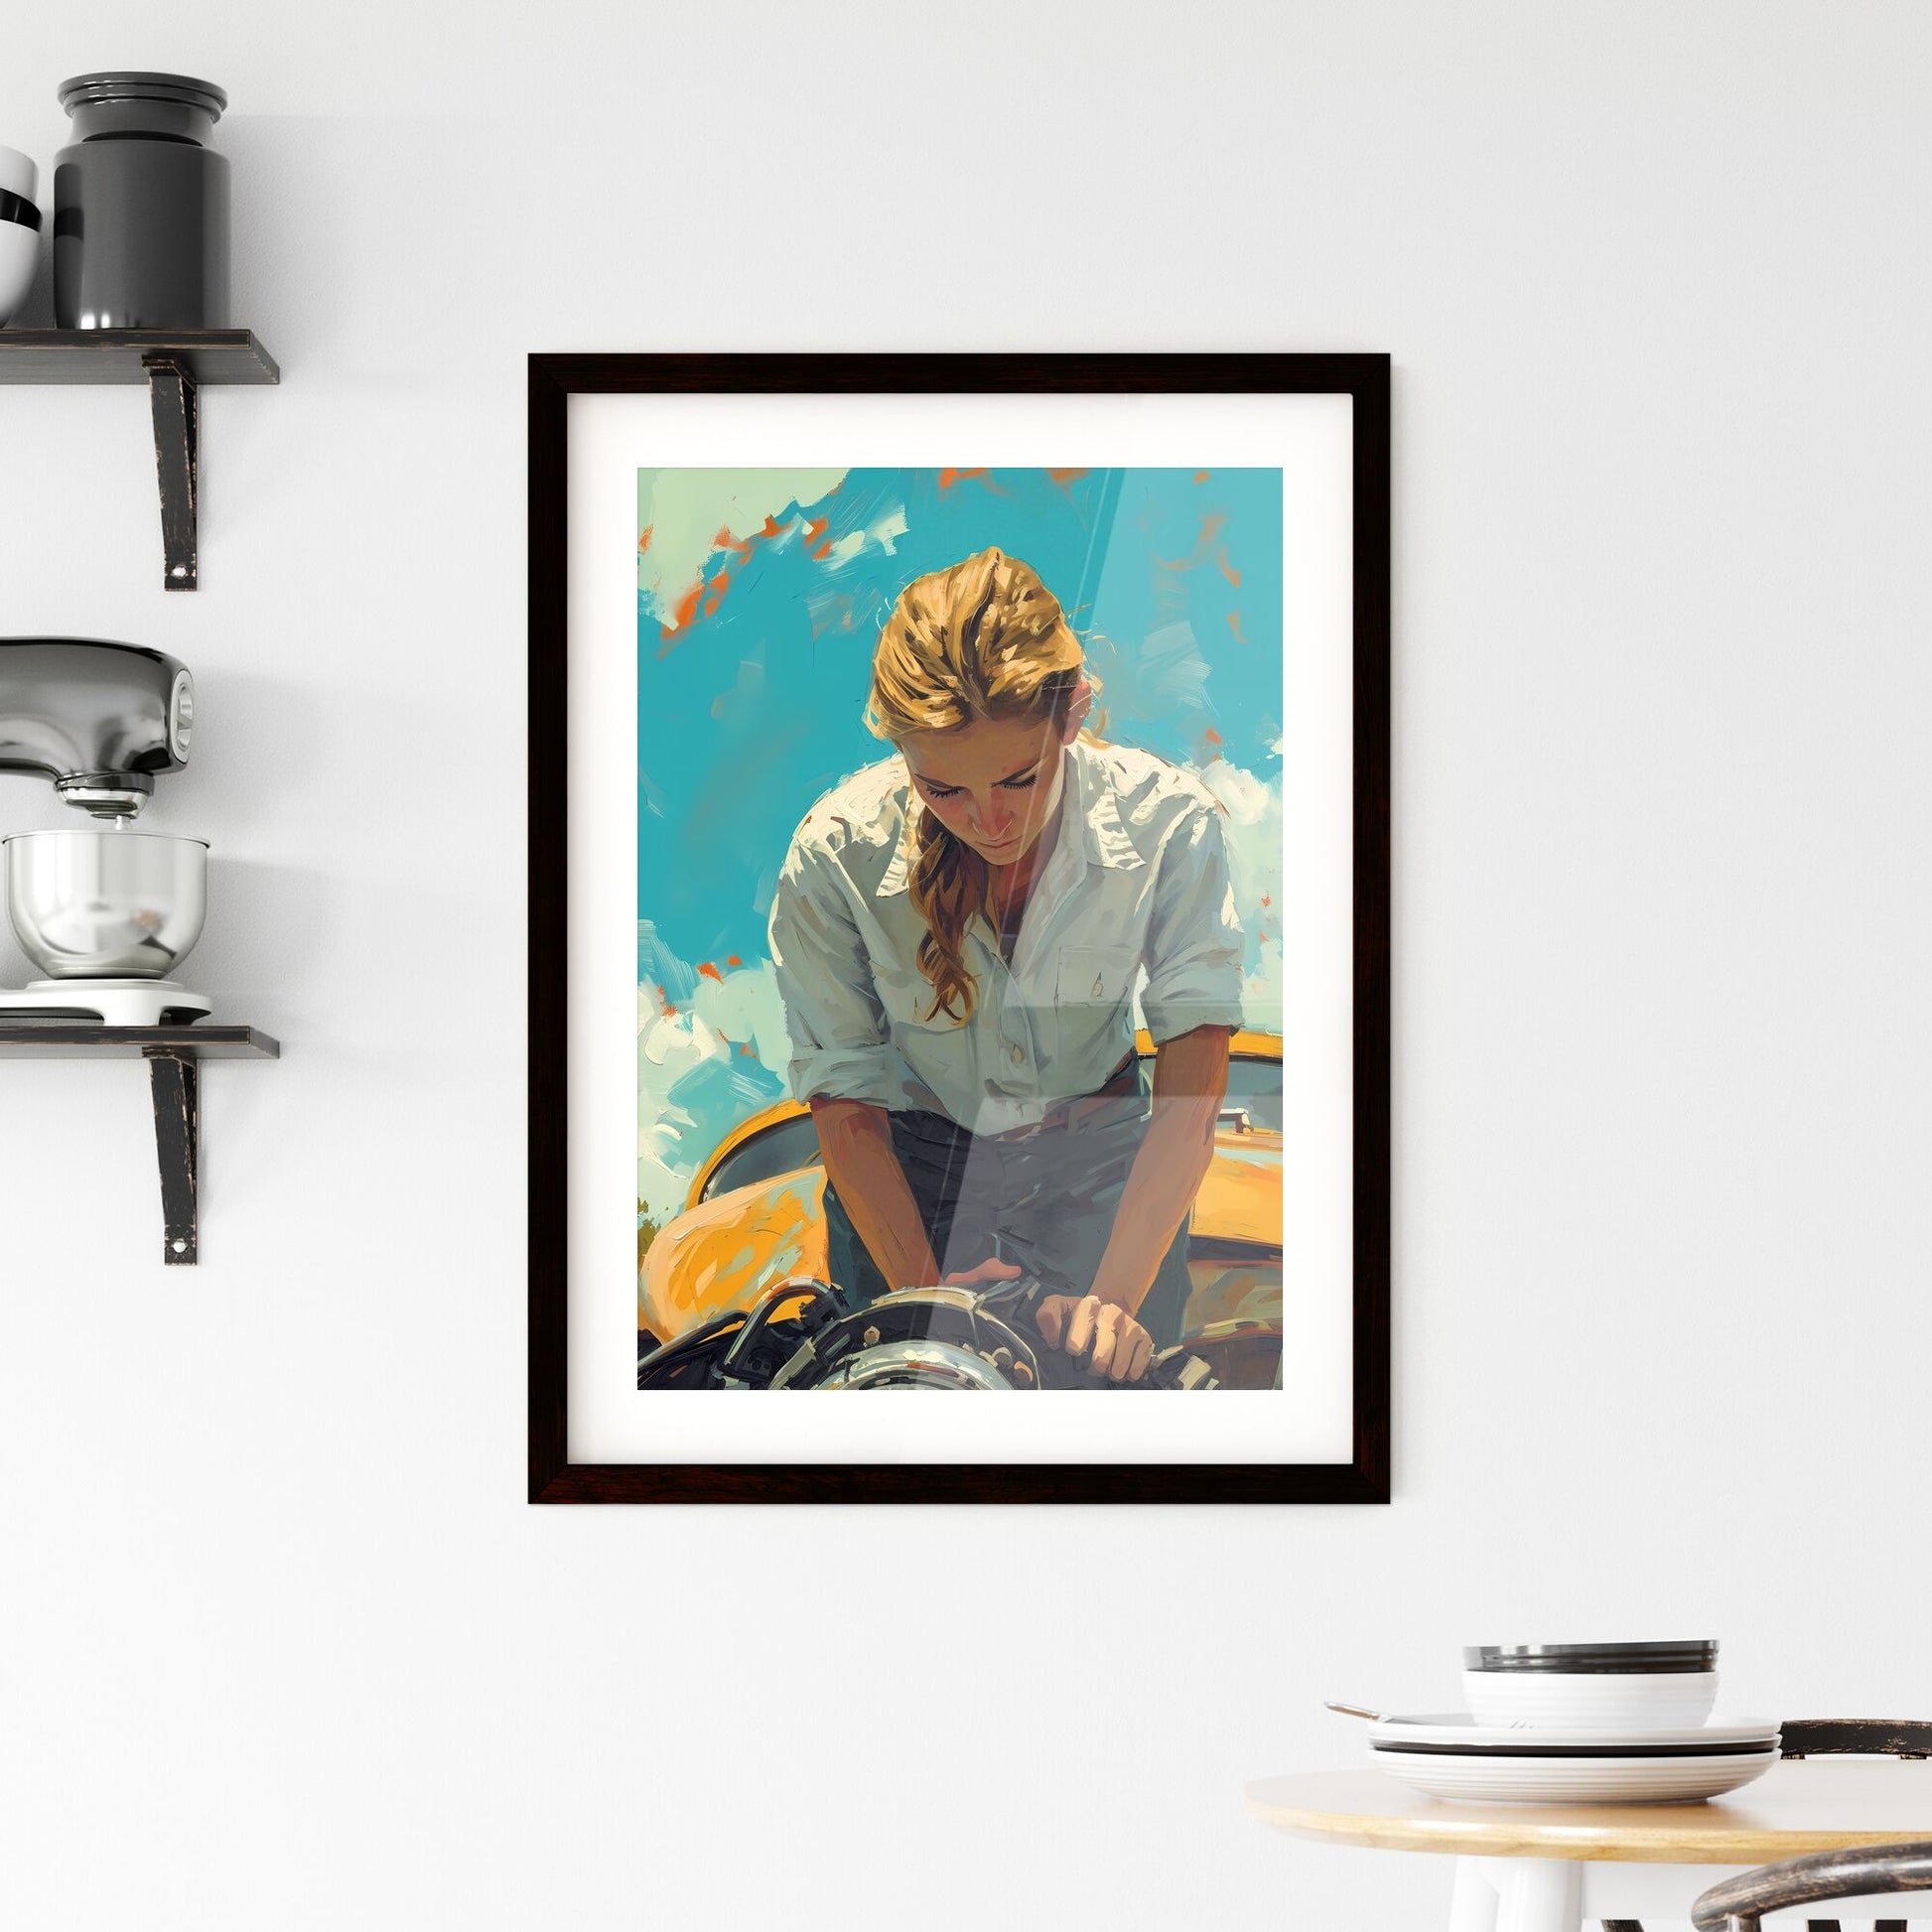 Auto mechanic - Art print of a woman standing on a yellow car Default Title